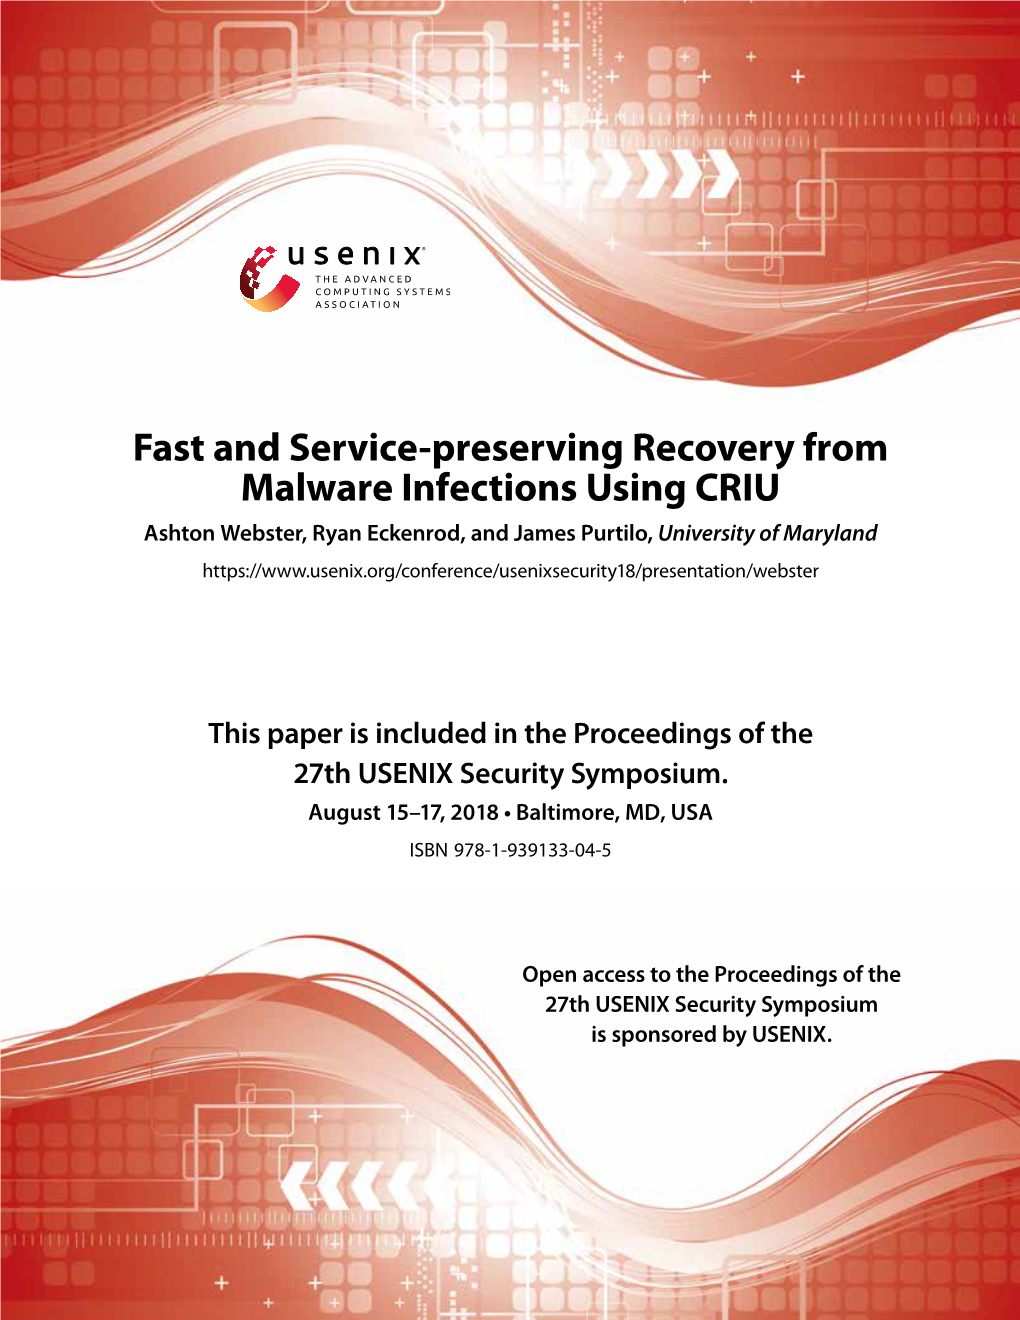 Fast and Service-Preserving Recovery from Malware Infections